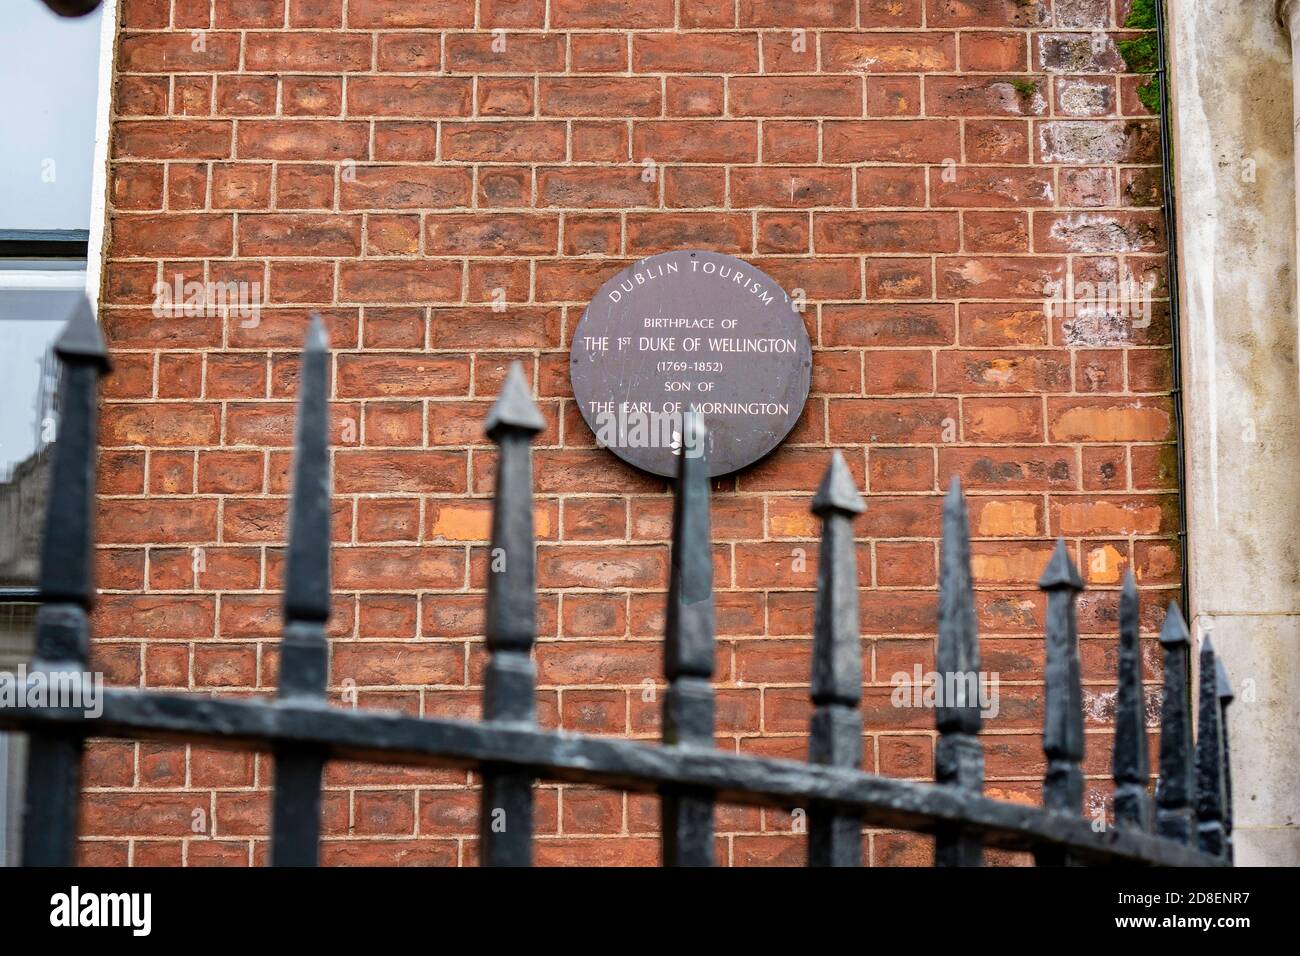 The birthplace of the Duke of Wellington, Arthur Wellesley, commemorated by this plaque in Merrion Street, Dublin, Ireland. Stock Photo